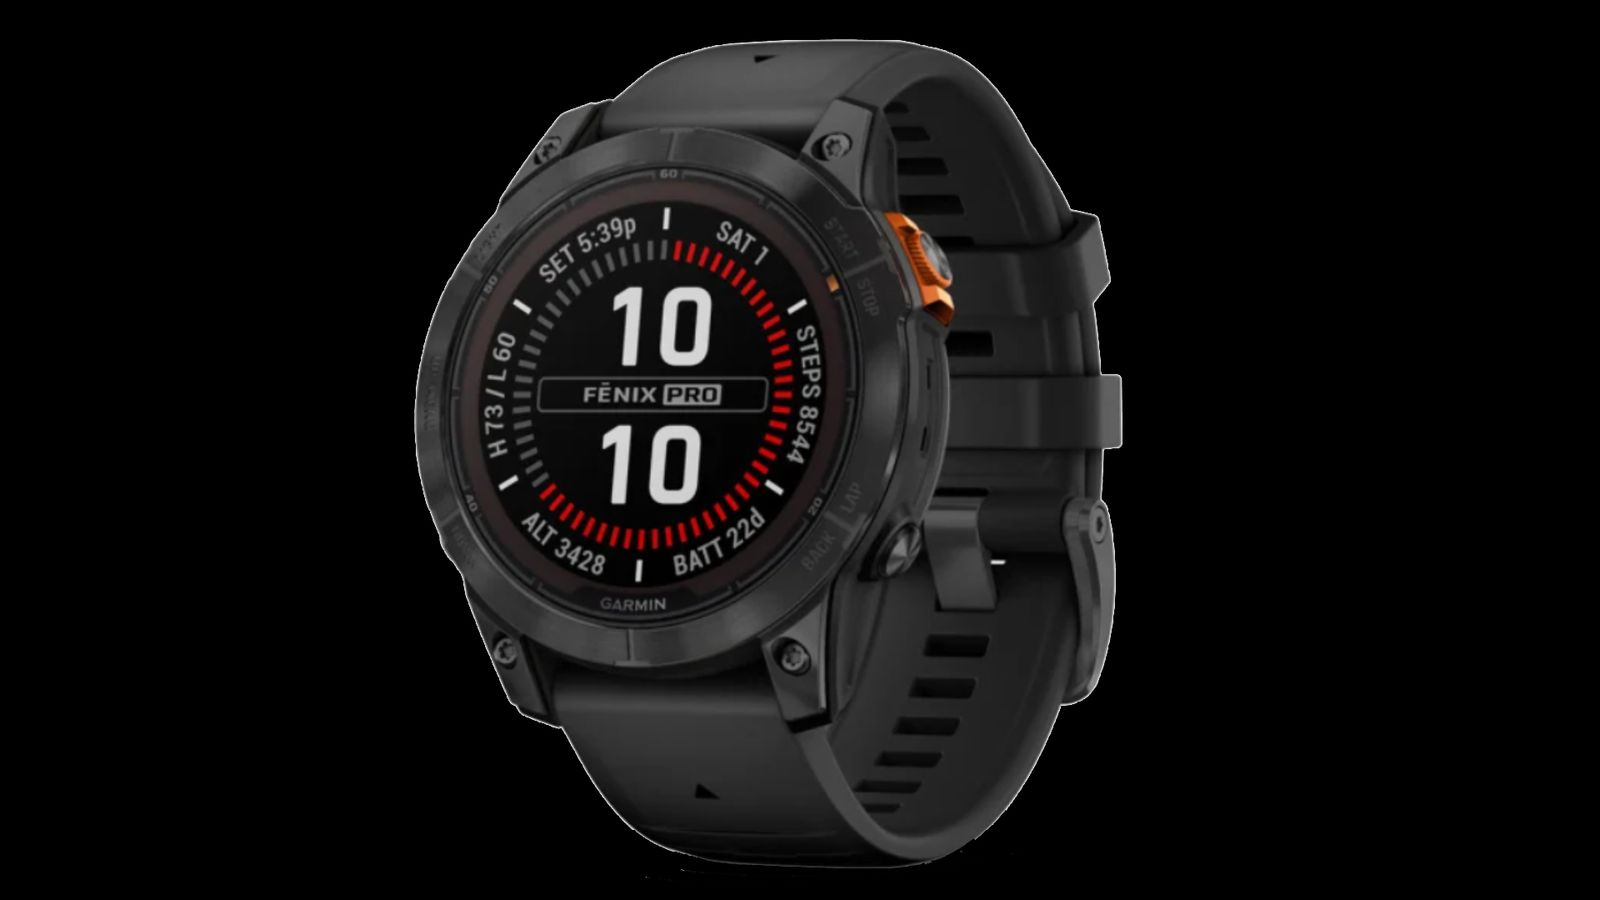 Garmin fēnix 7 Pro Solar product image of a black-band smartwatch featuring an orange button on the side and the time 10:10 on the display in white.